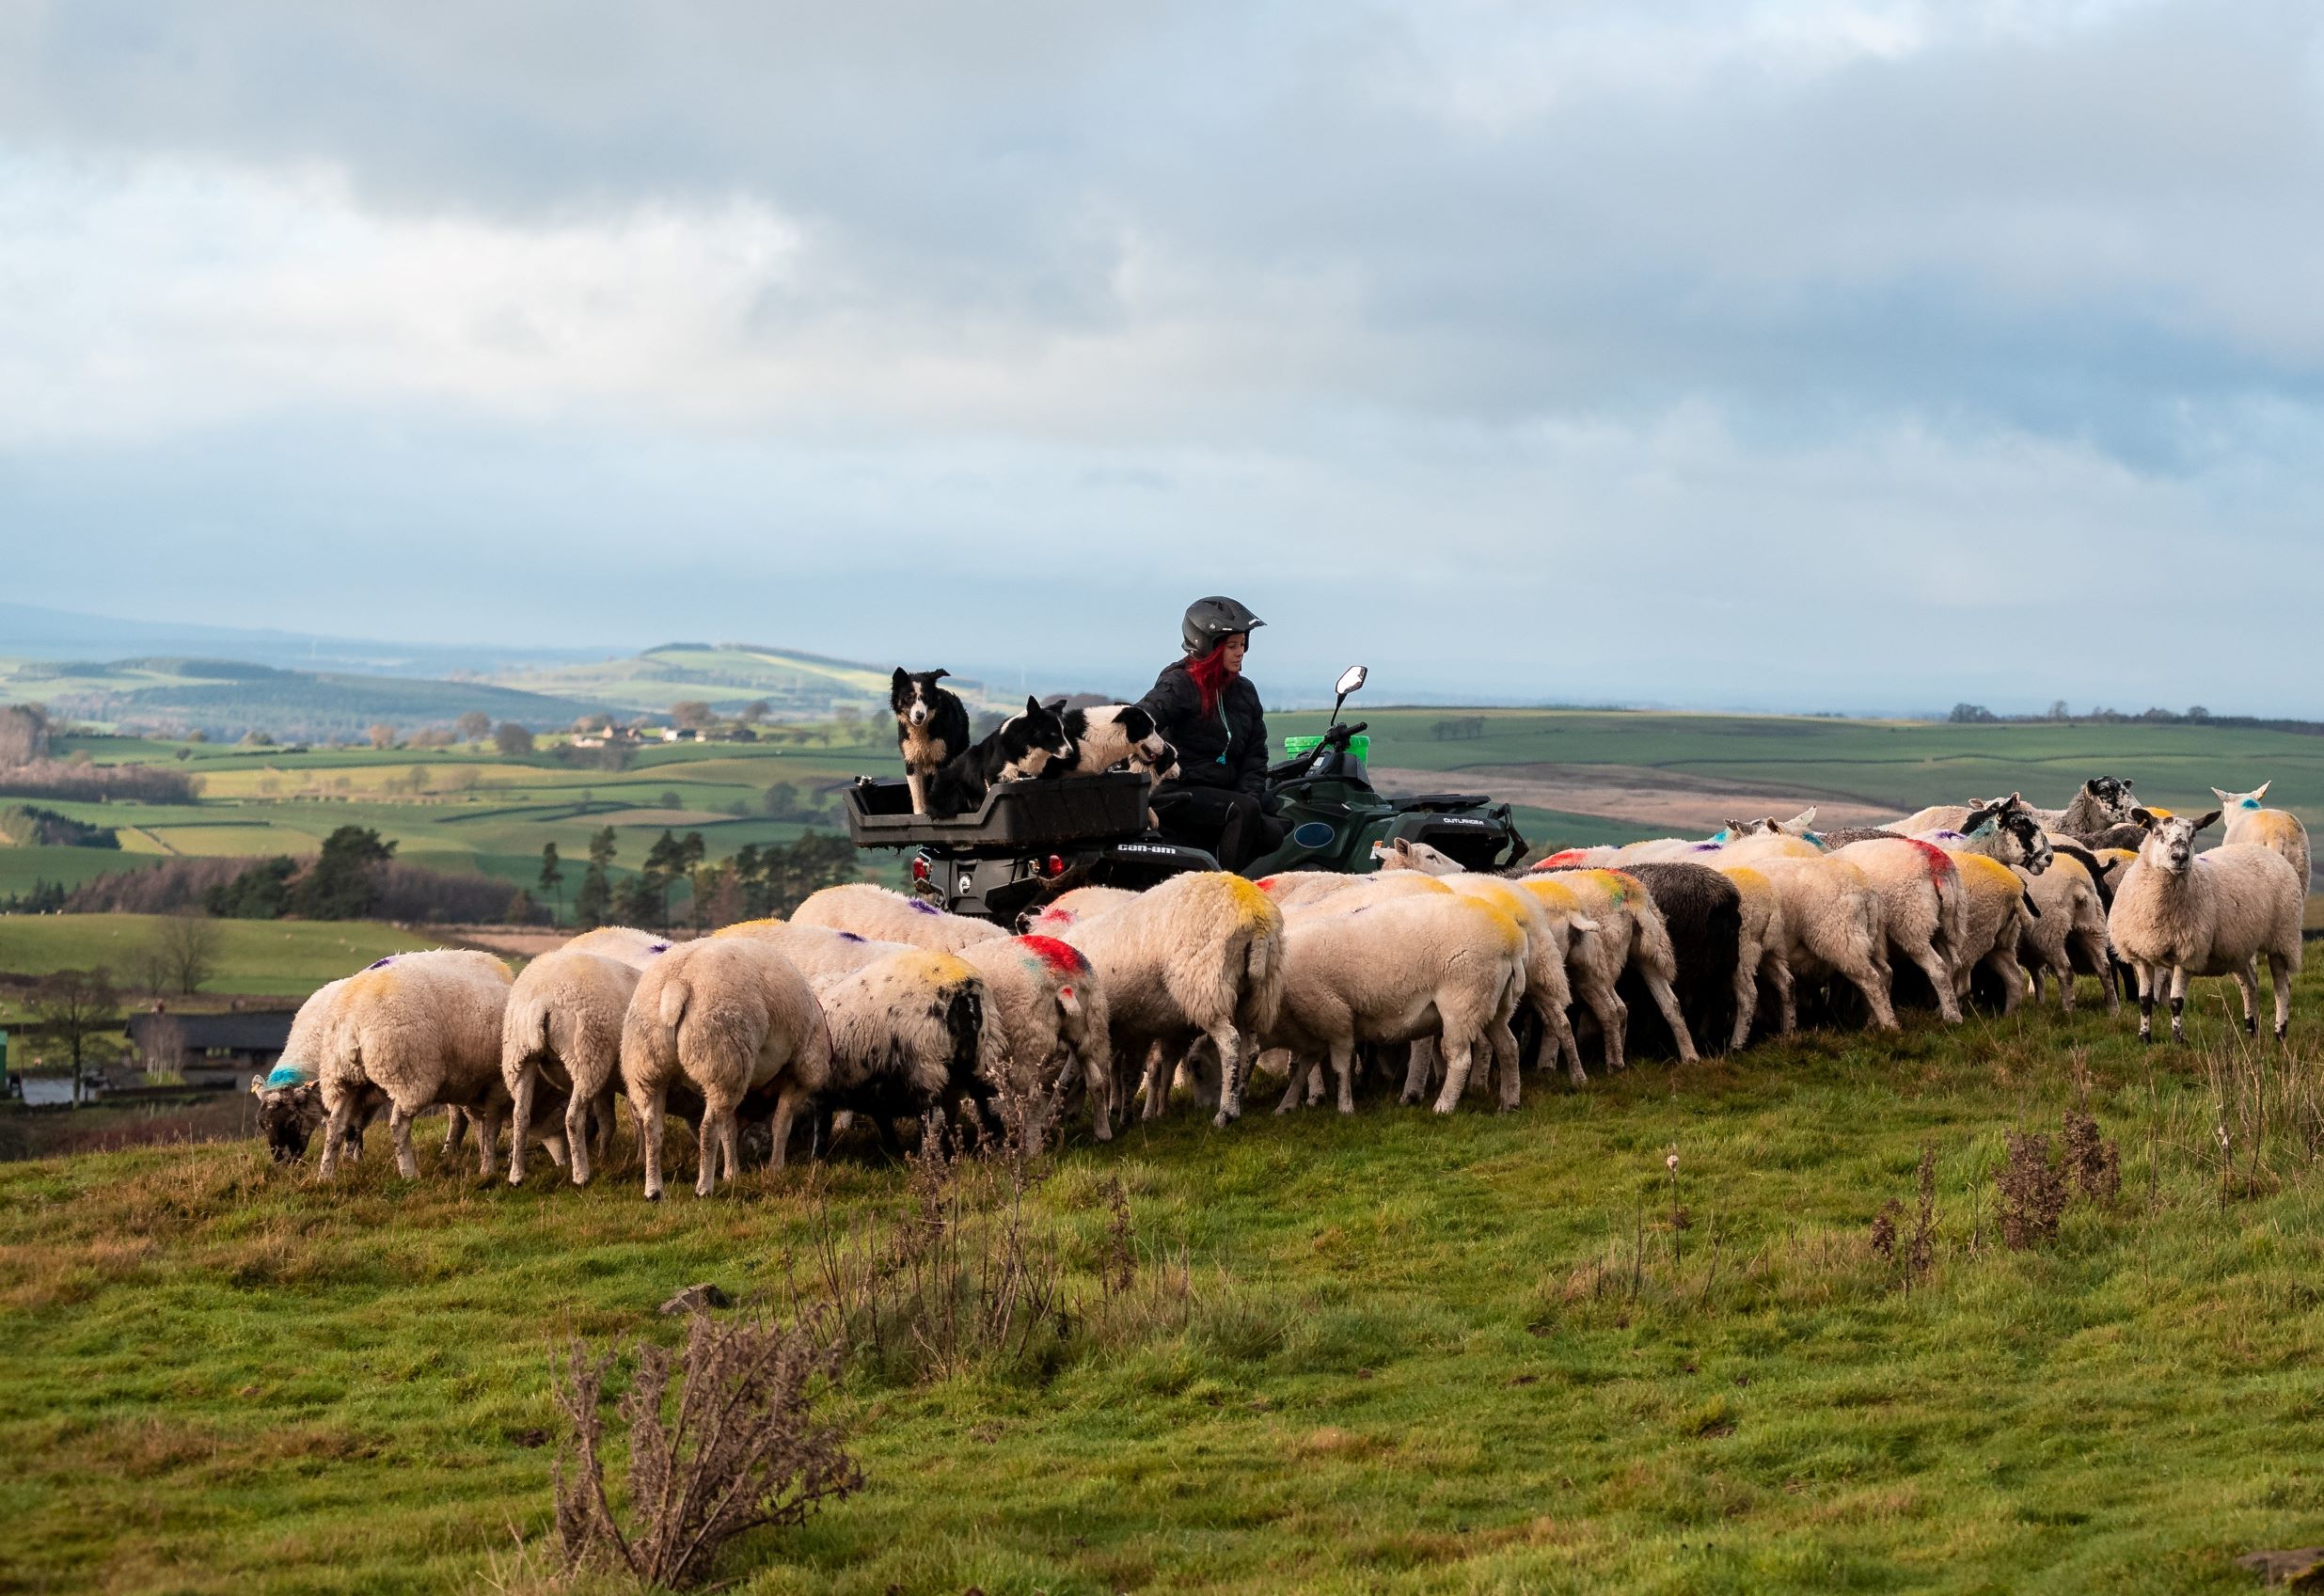 Hannah Jackson on her Can-Am ATV next to pack of sheep